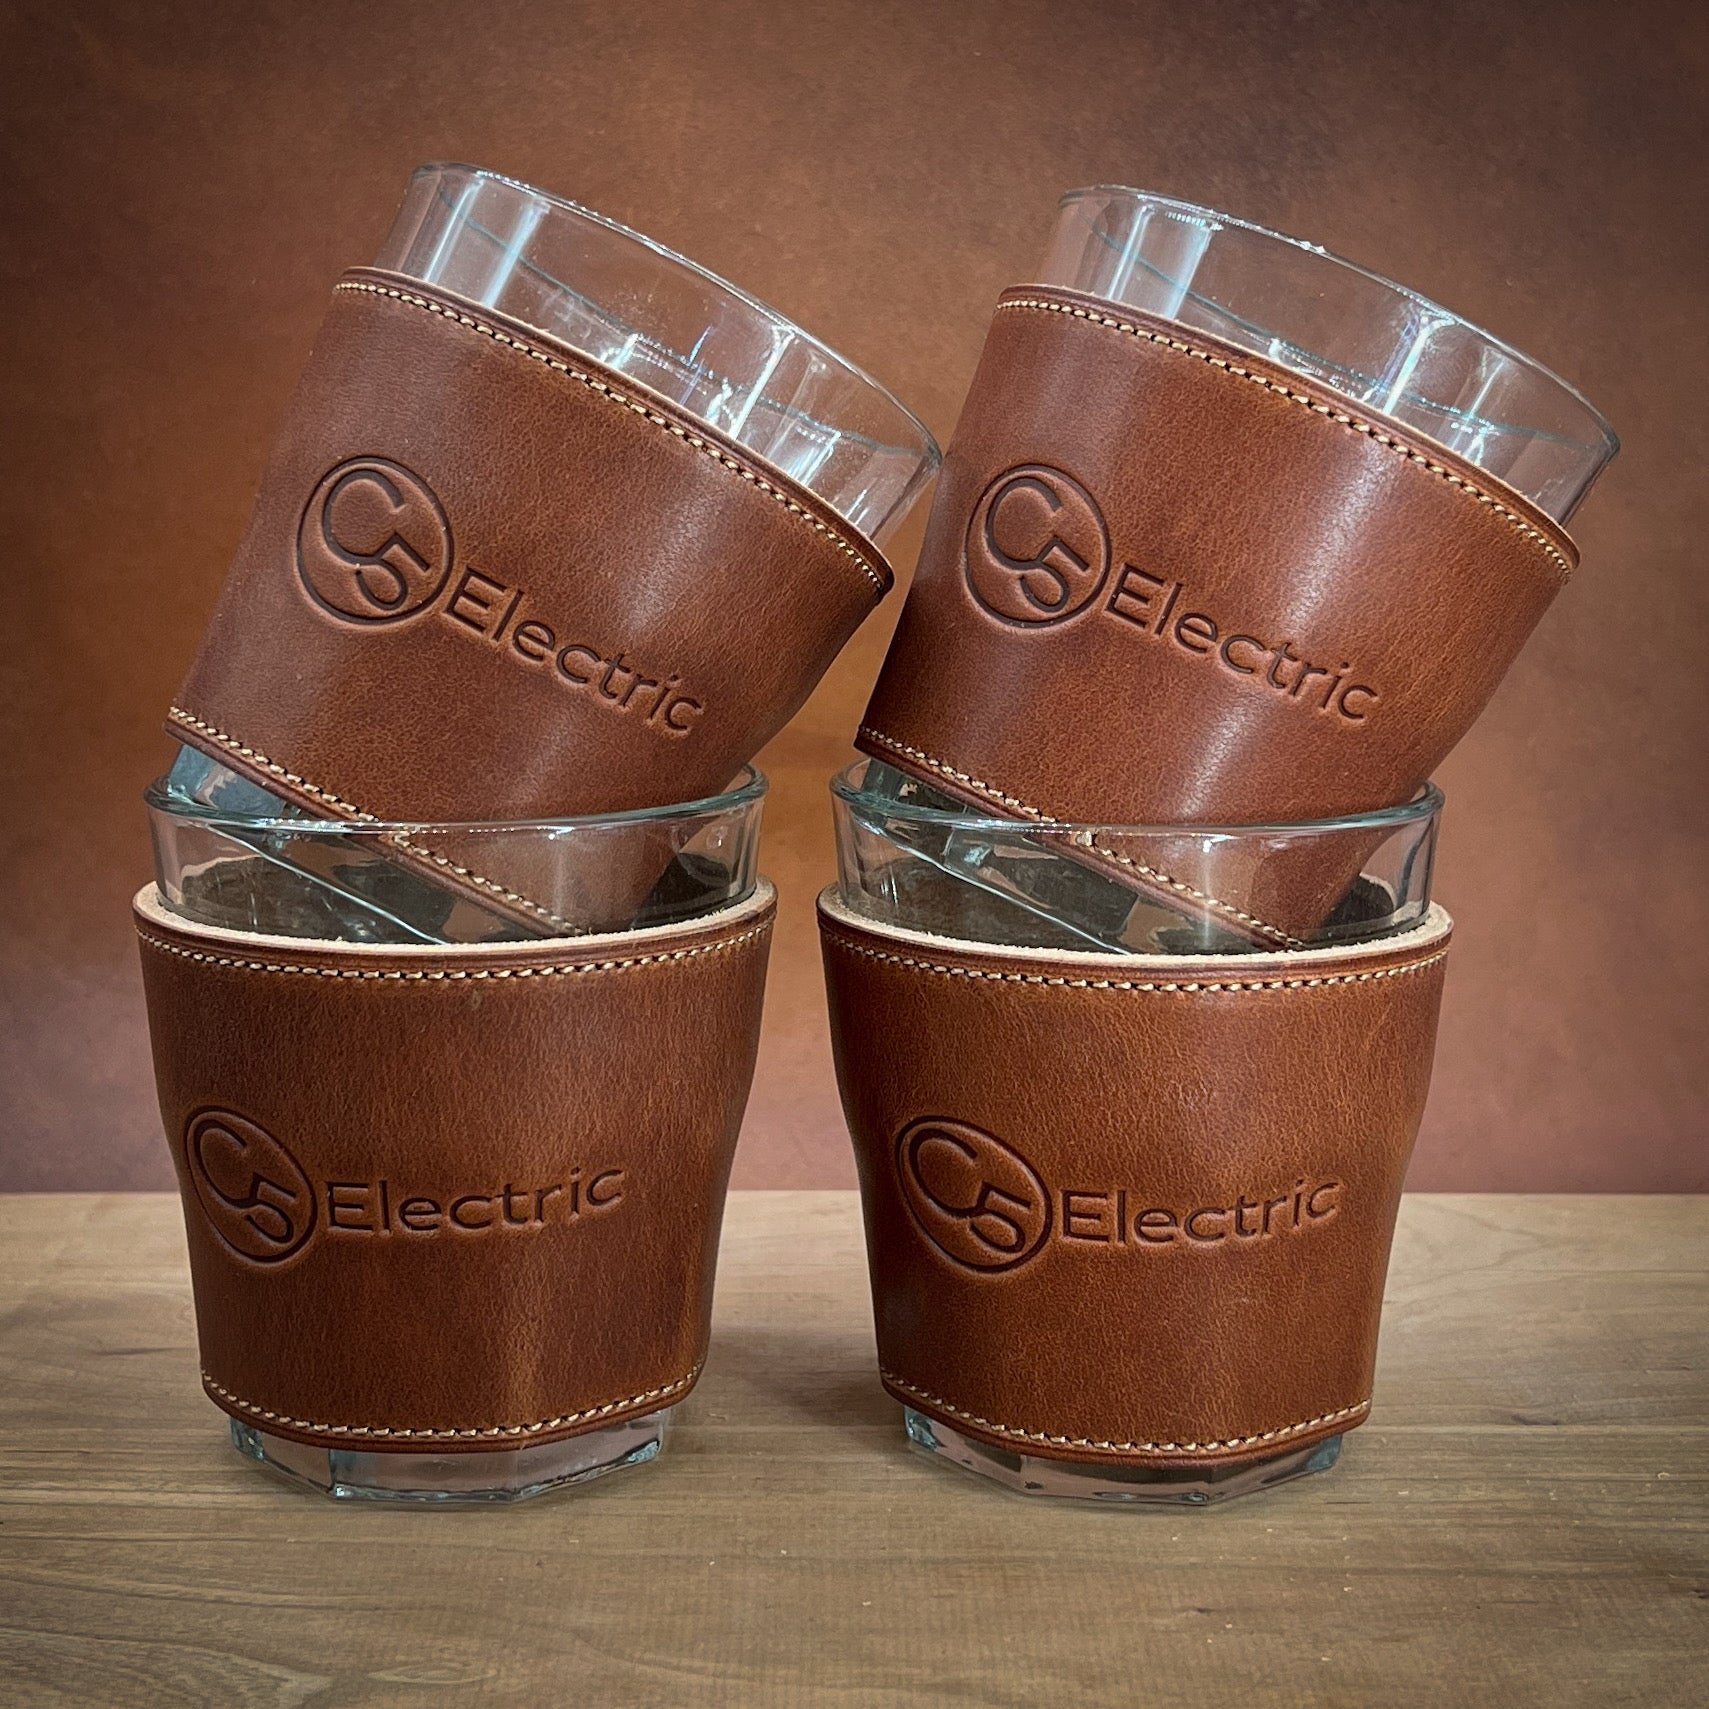 Promotional Whiskey Glasses for C5 electric in Horween leather